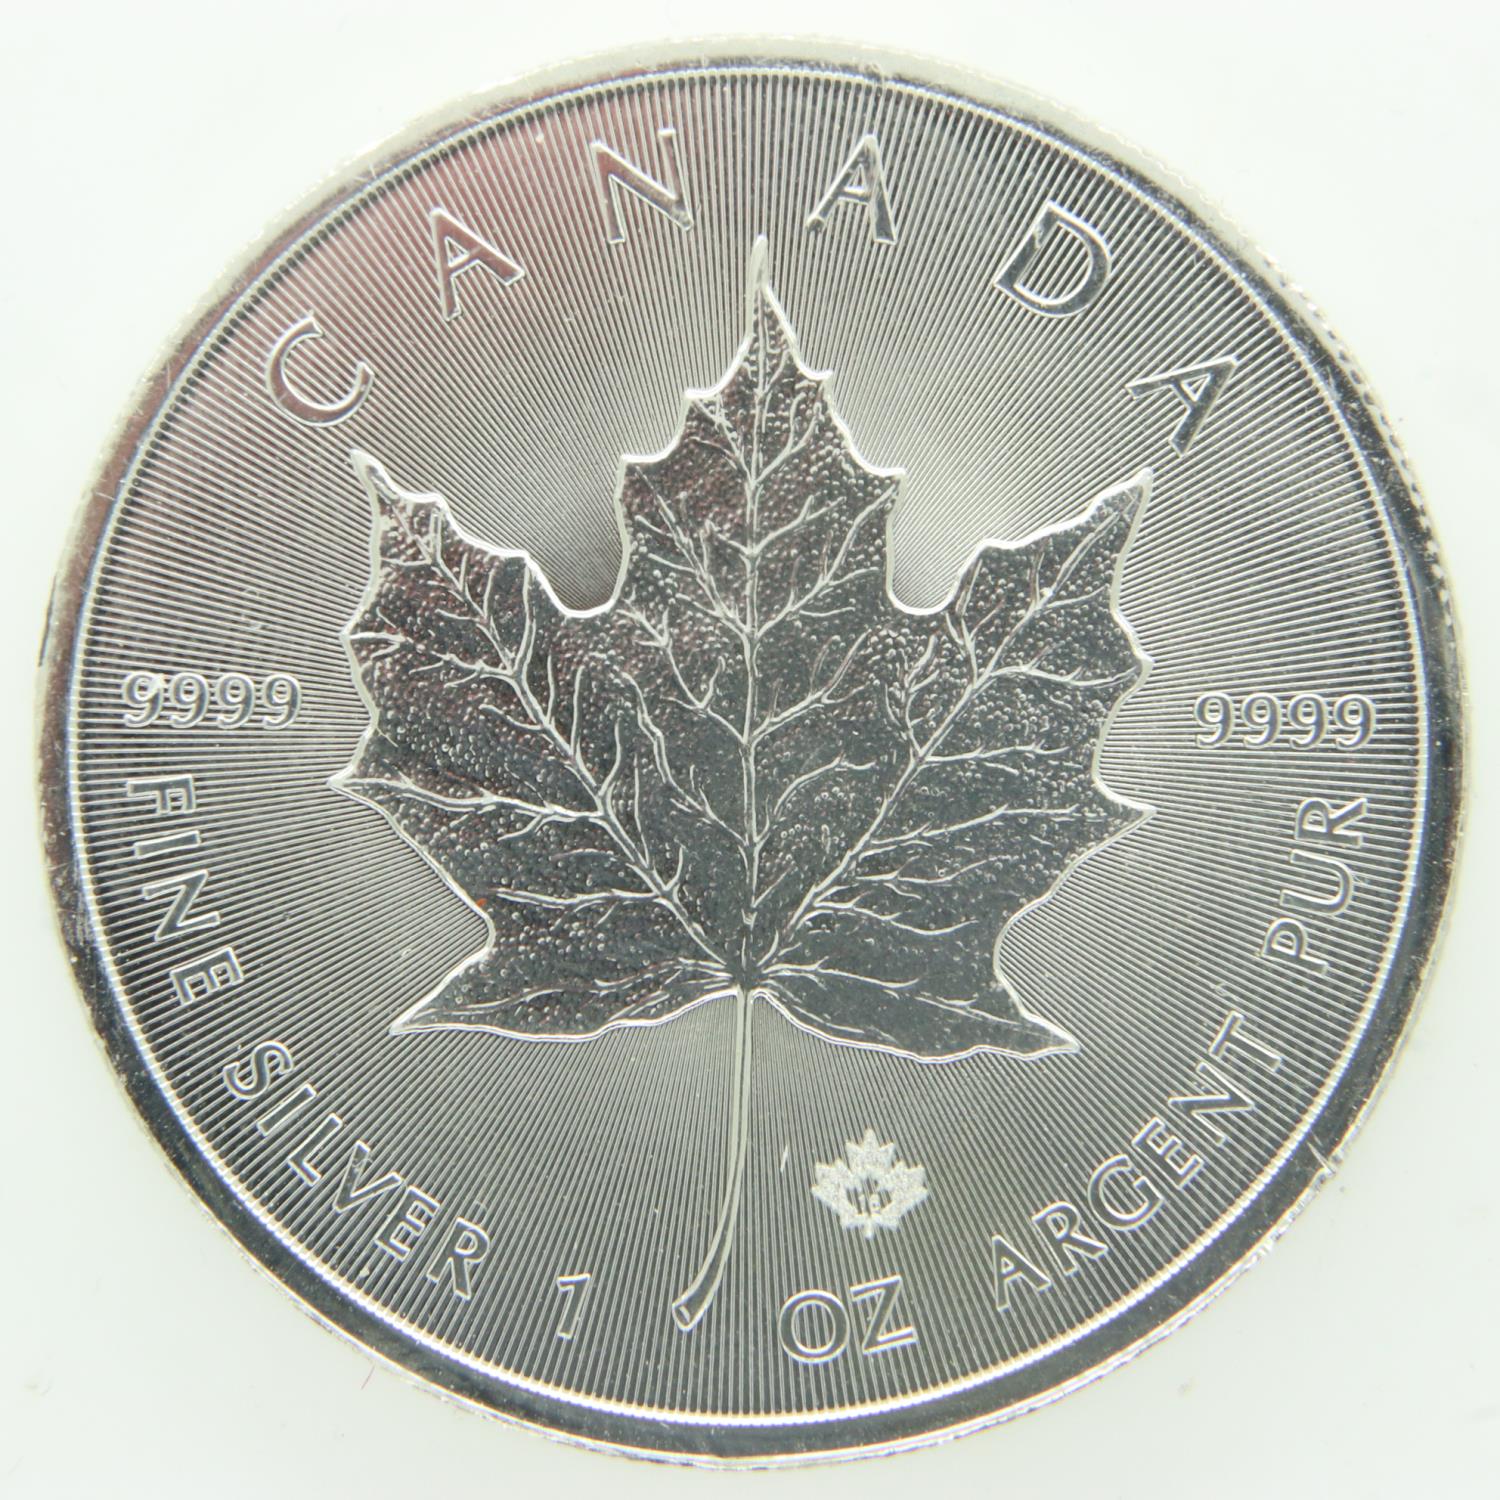 2018 Canadian silver Maple one ounce bullion round with privy mark - uncirculated condition. UK P&